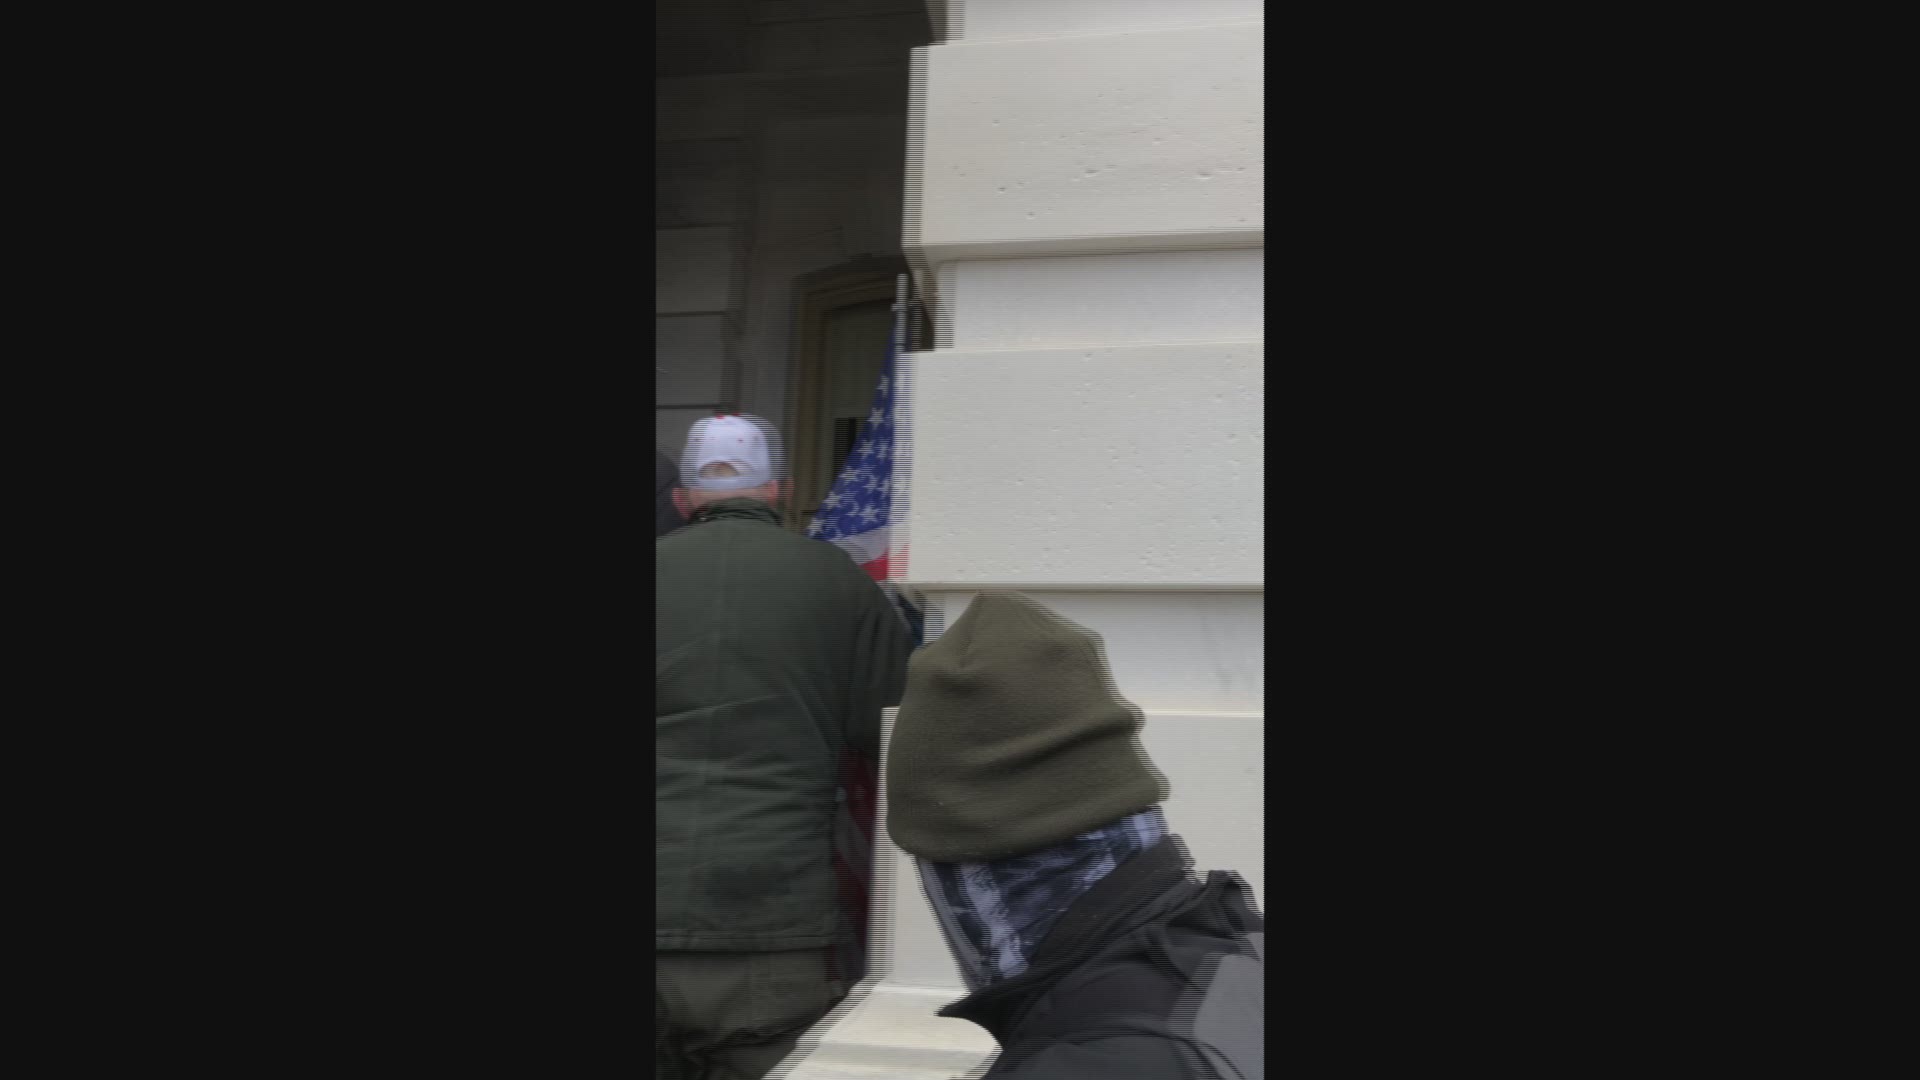 A new video released by Judge Royce Lamberth appears to show Jacob Chansley joining in with a mob entering the U.S. Capitol building on January 6.